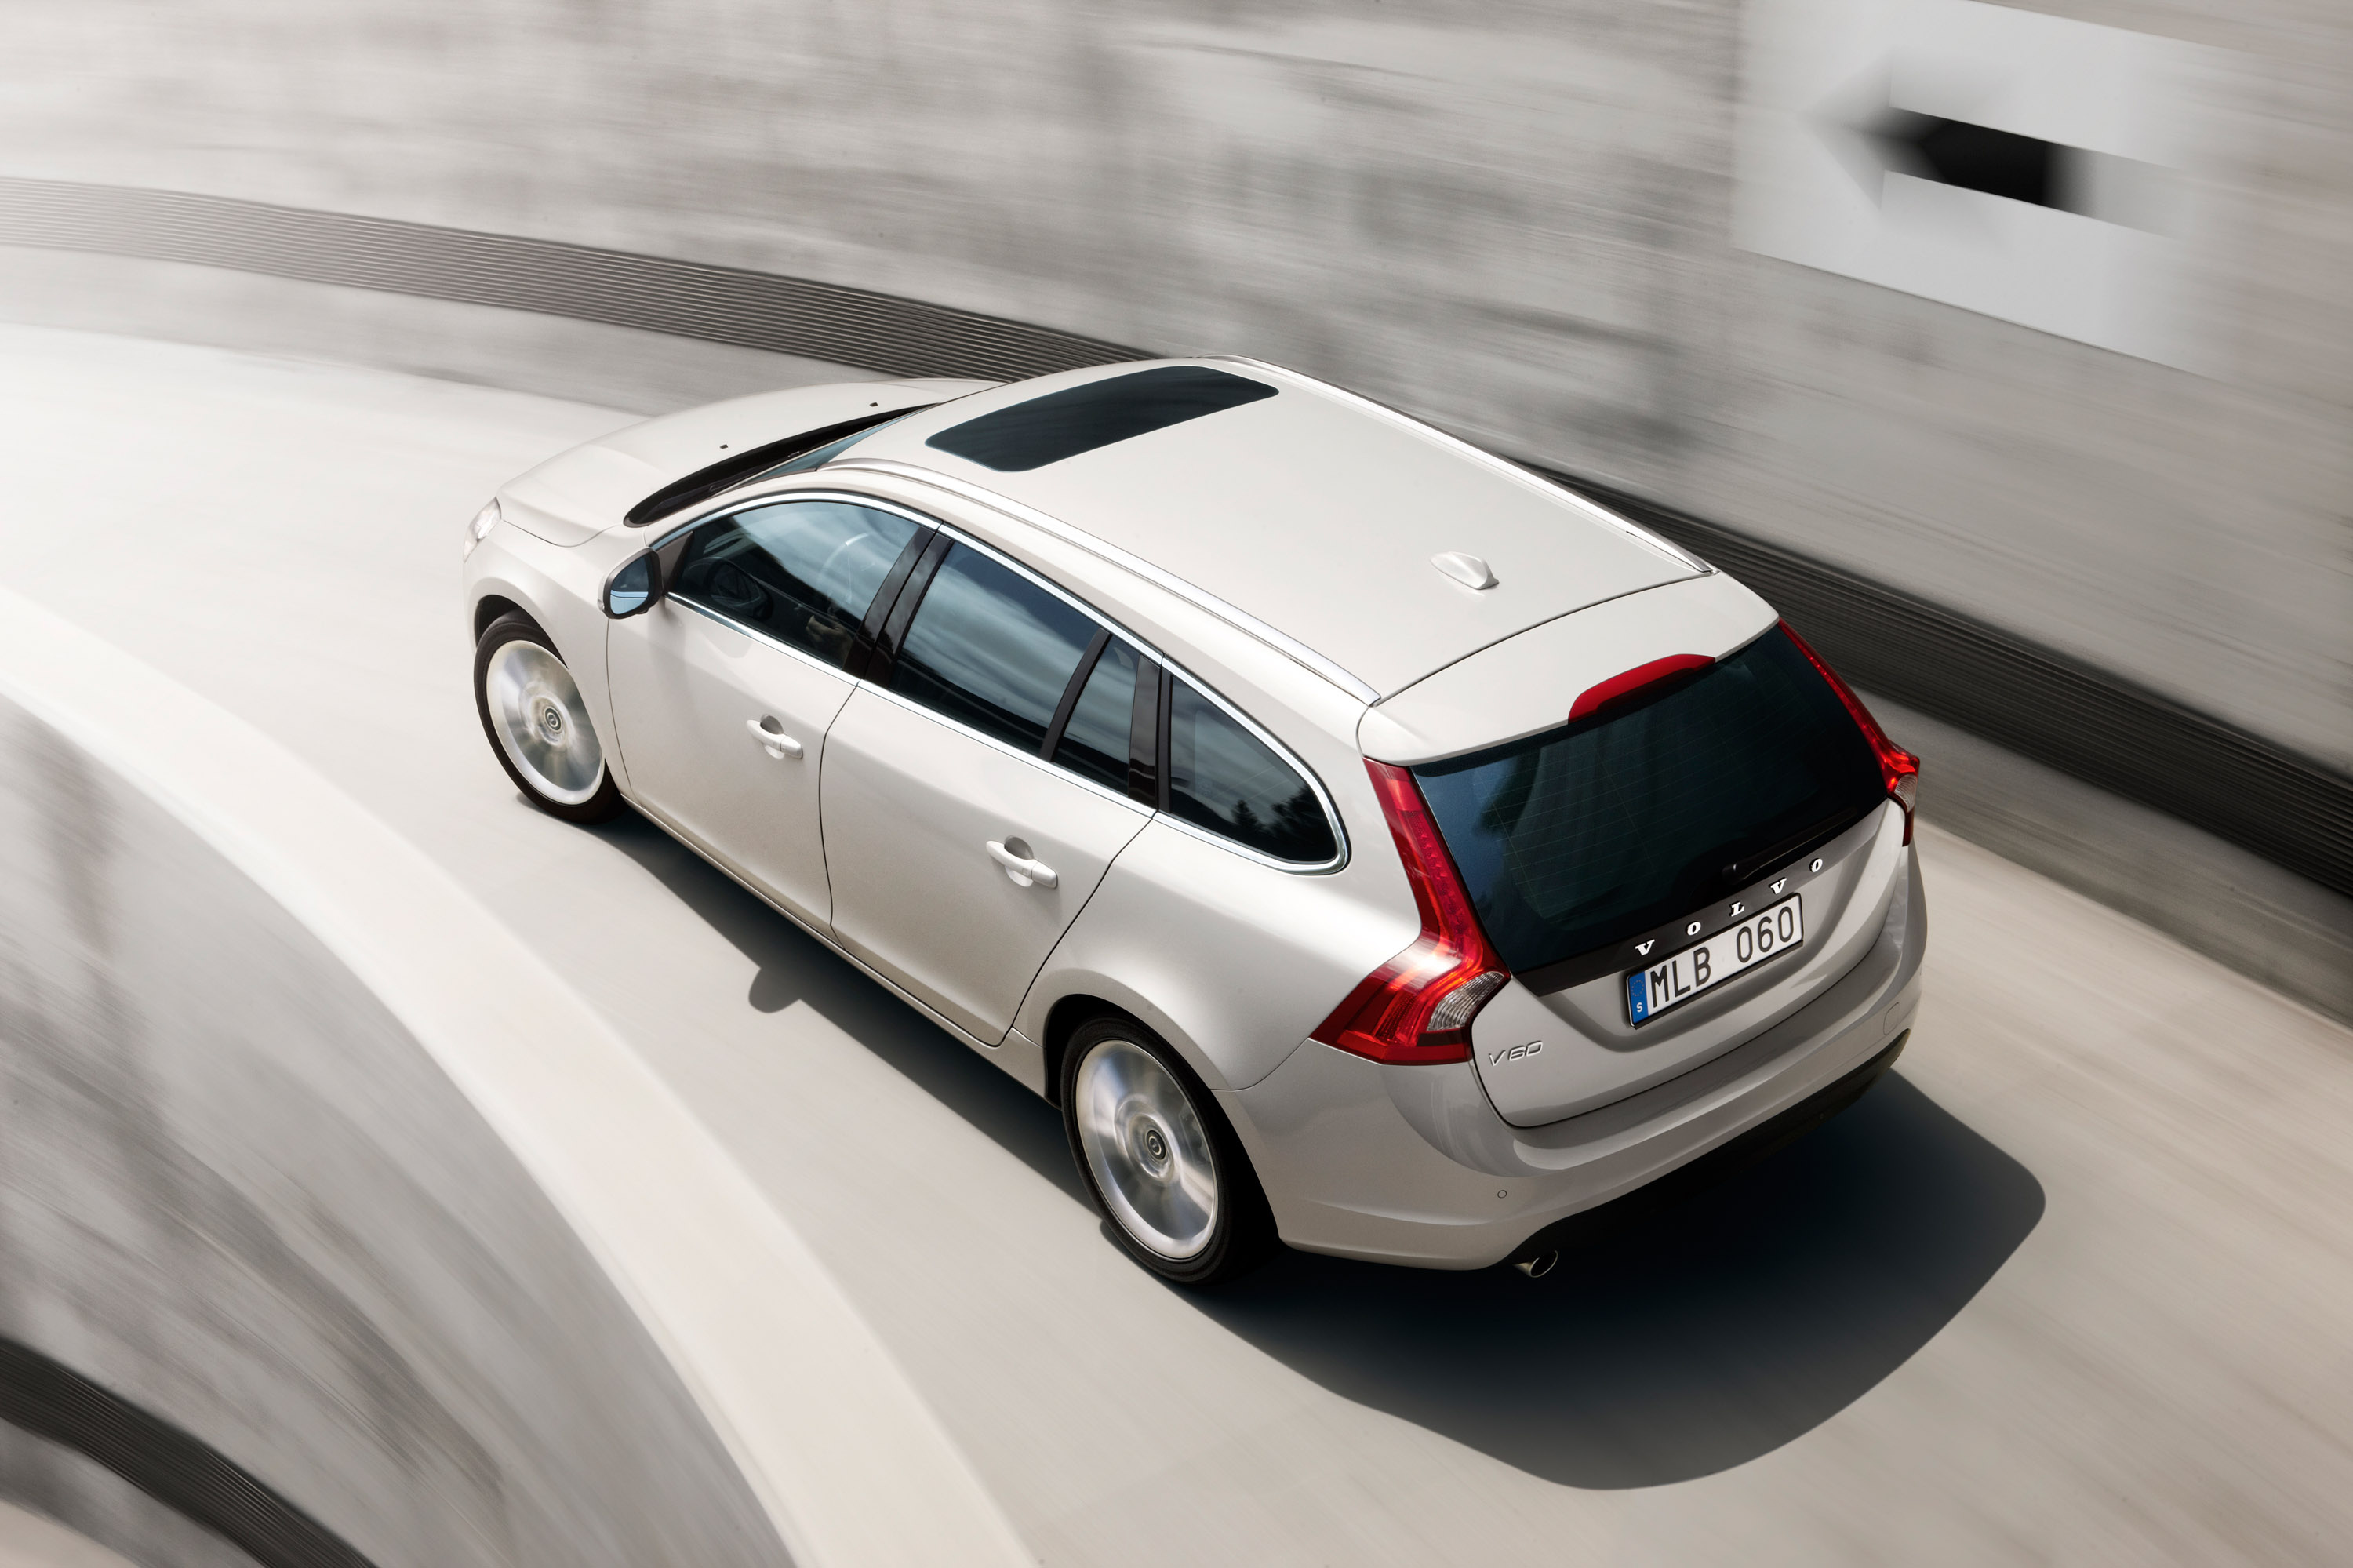 Volvo V60, 2011 model, HD picture, Car enthusiasts will love, 3000x2000 HD Desktop